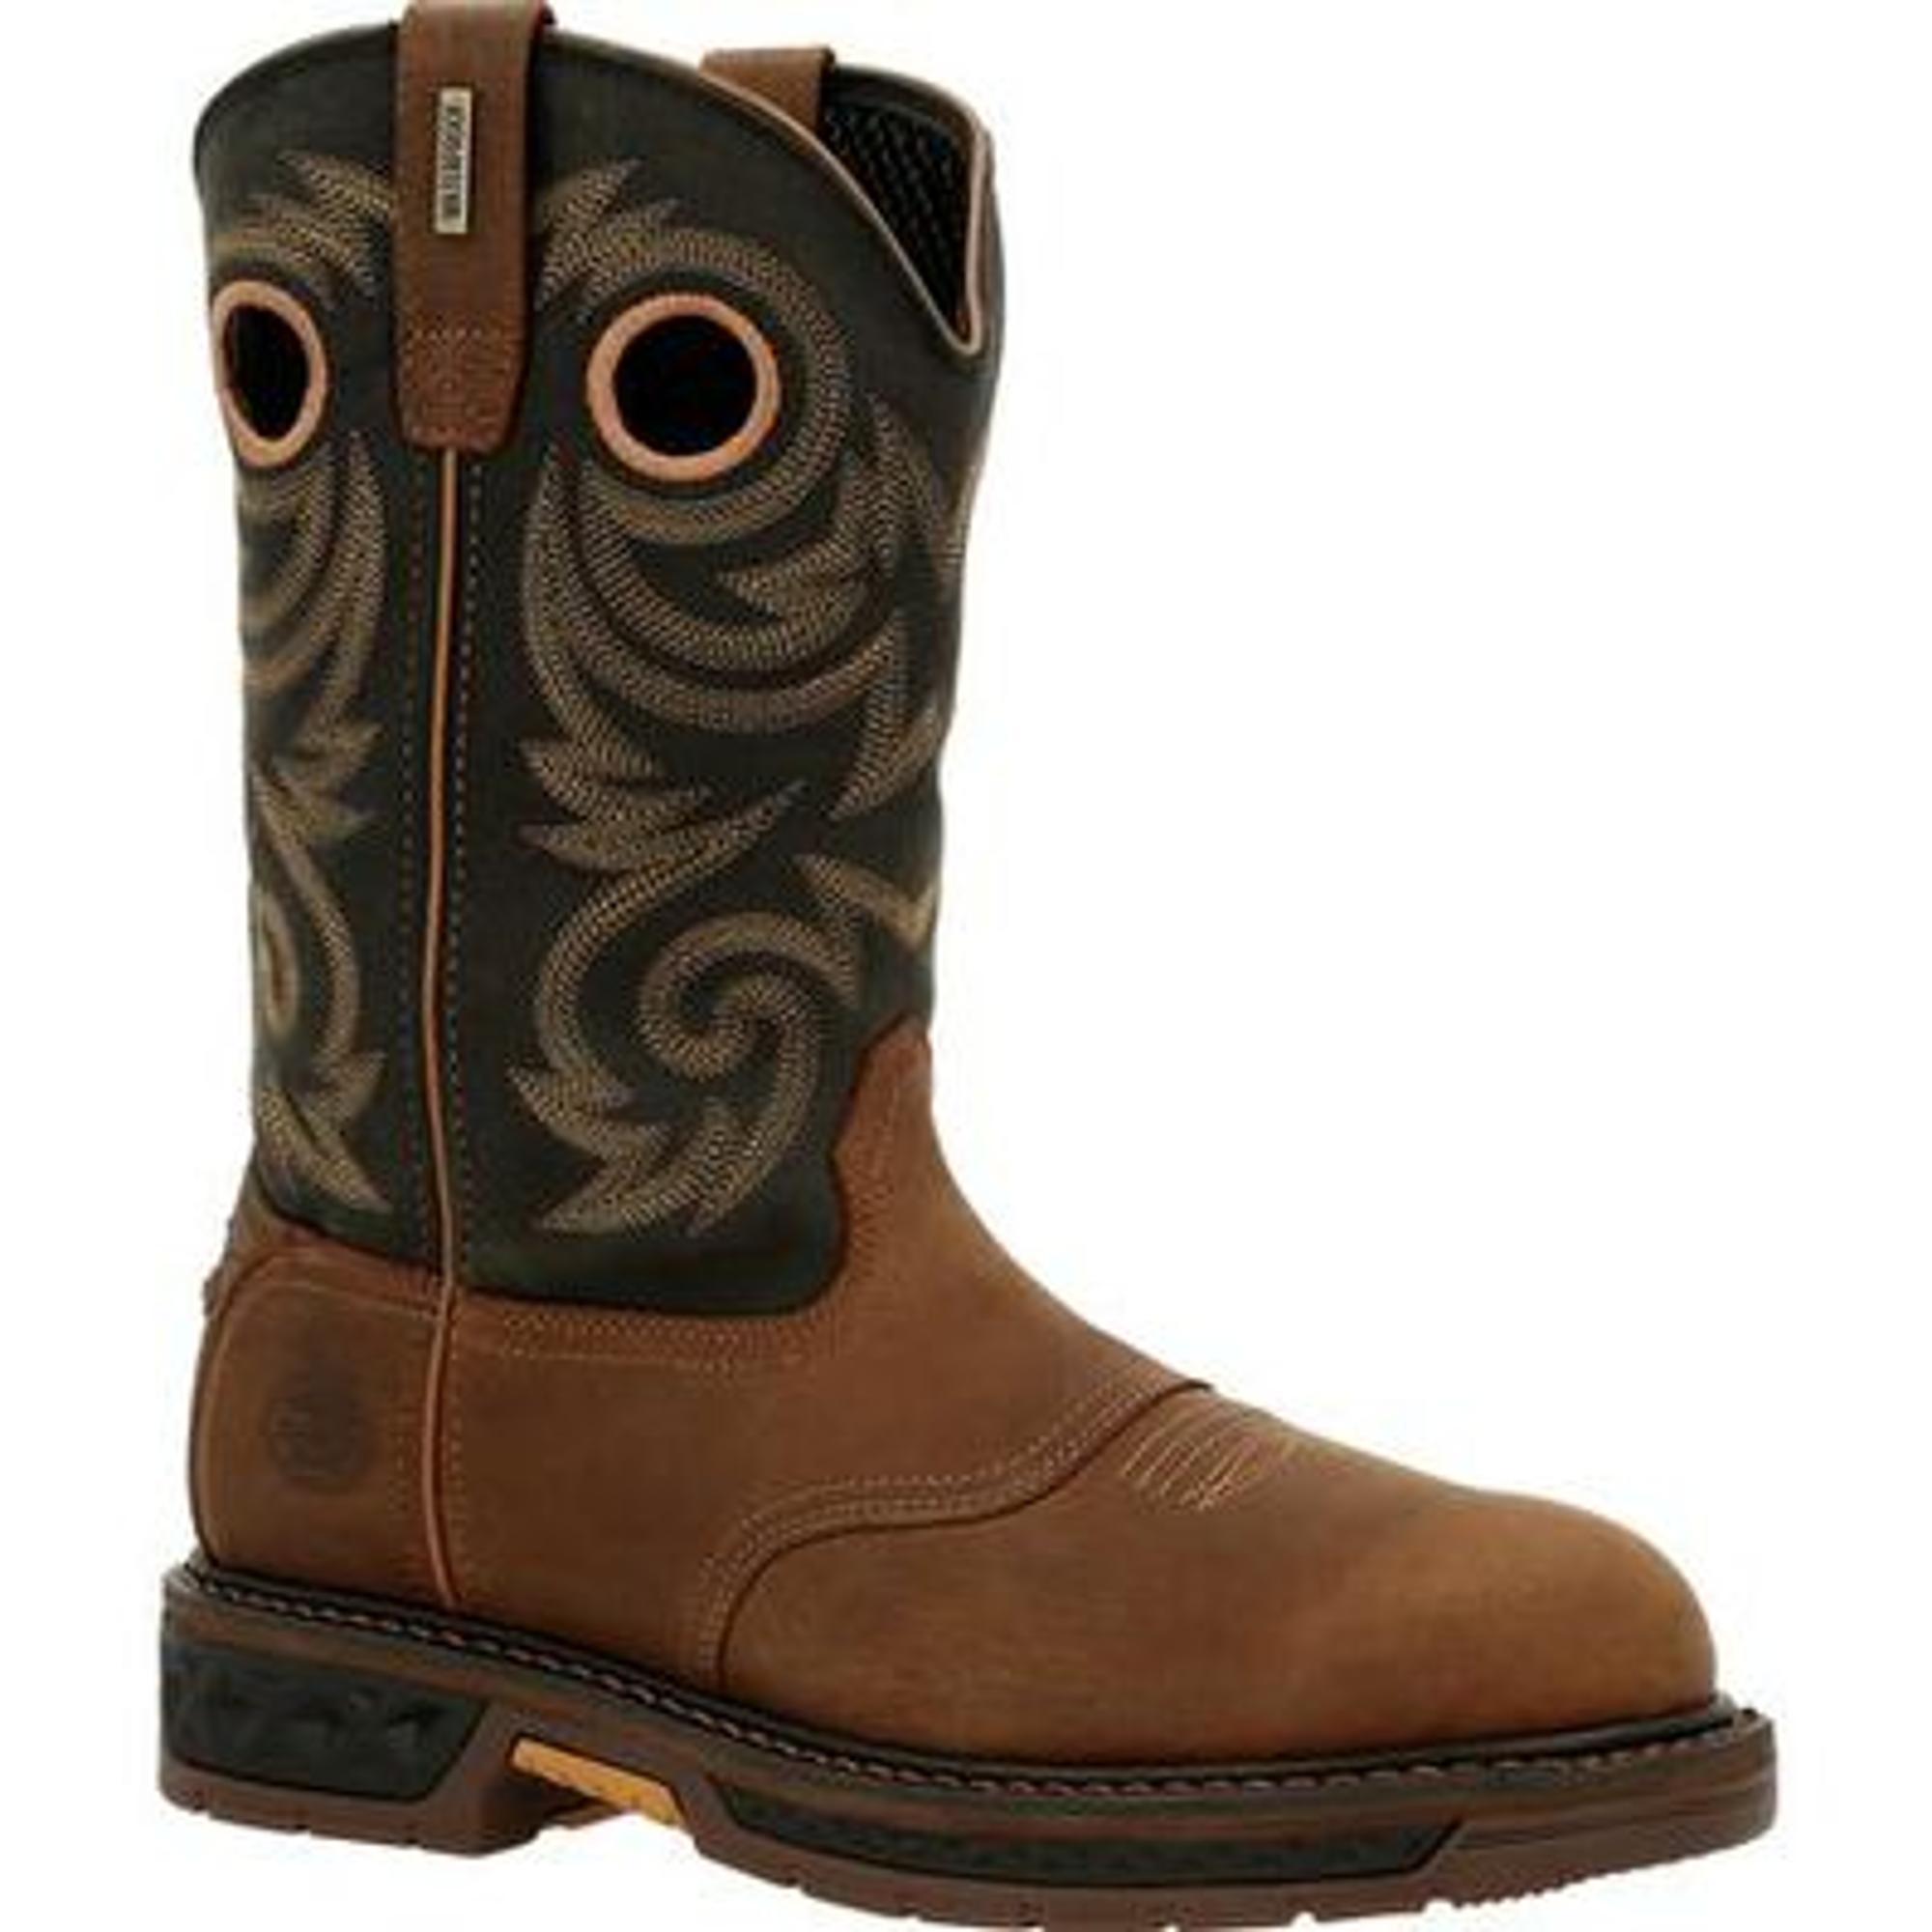 Georgia Boot Carbo- Tec Lt Waterproof Pull On Work Boots